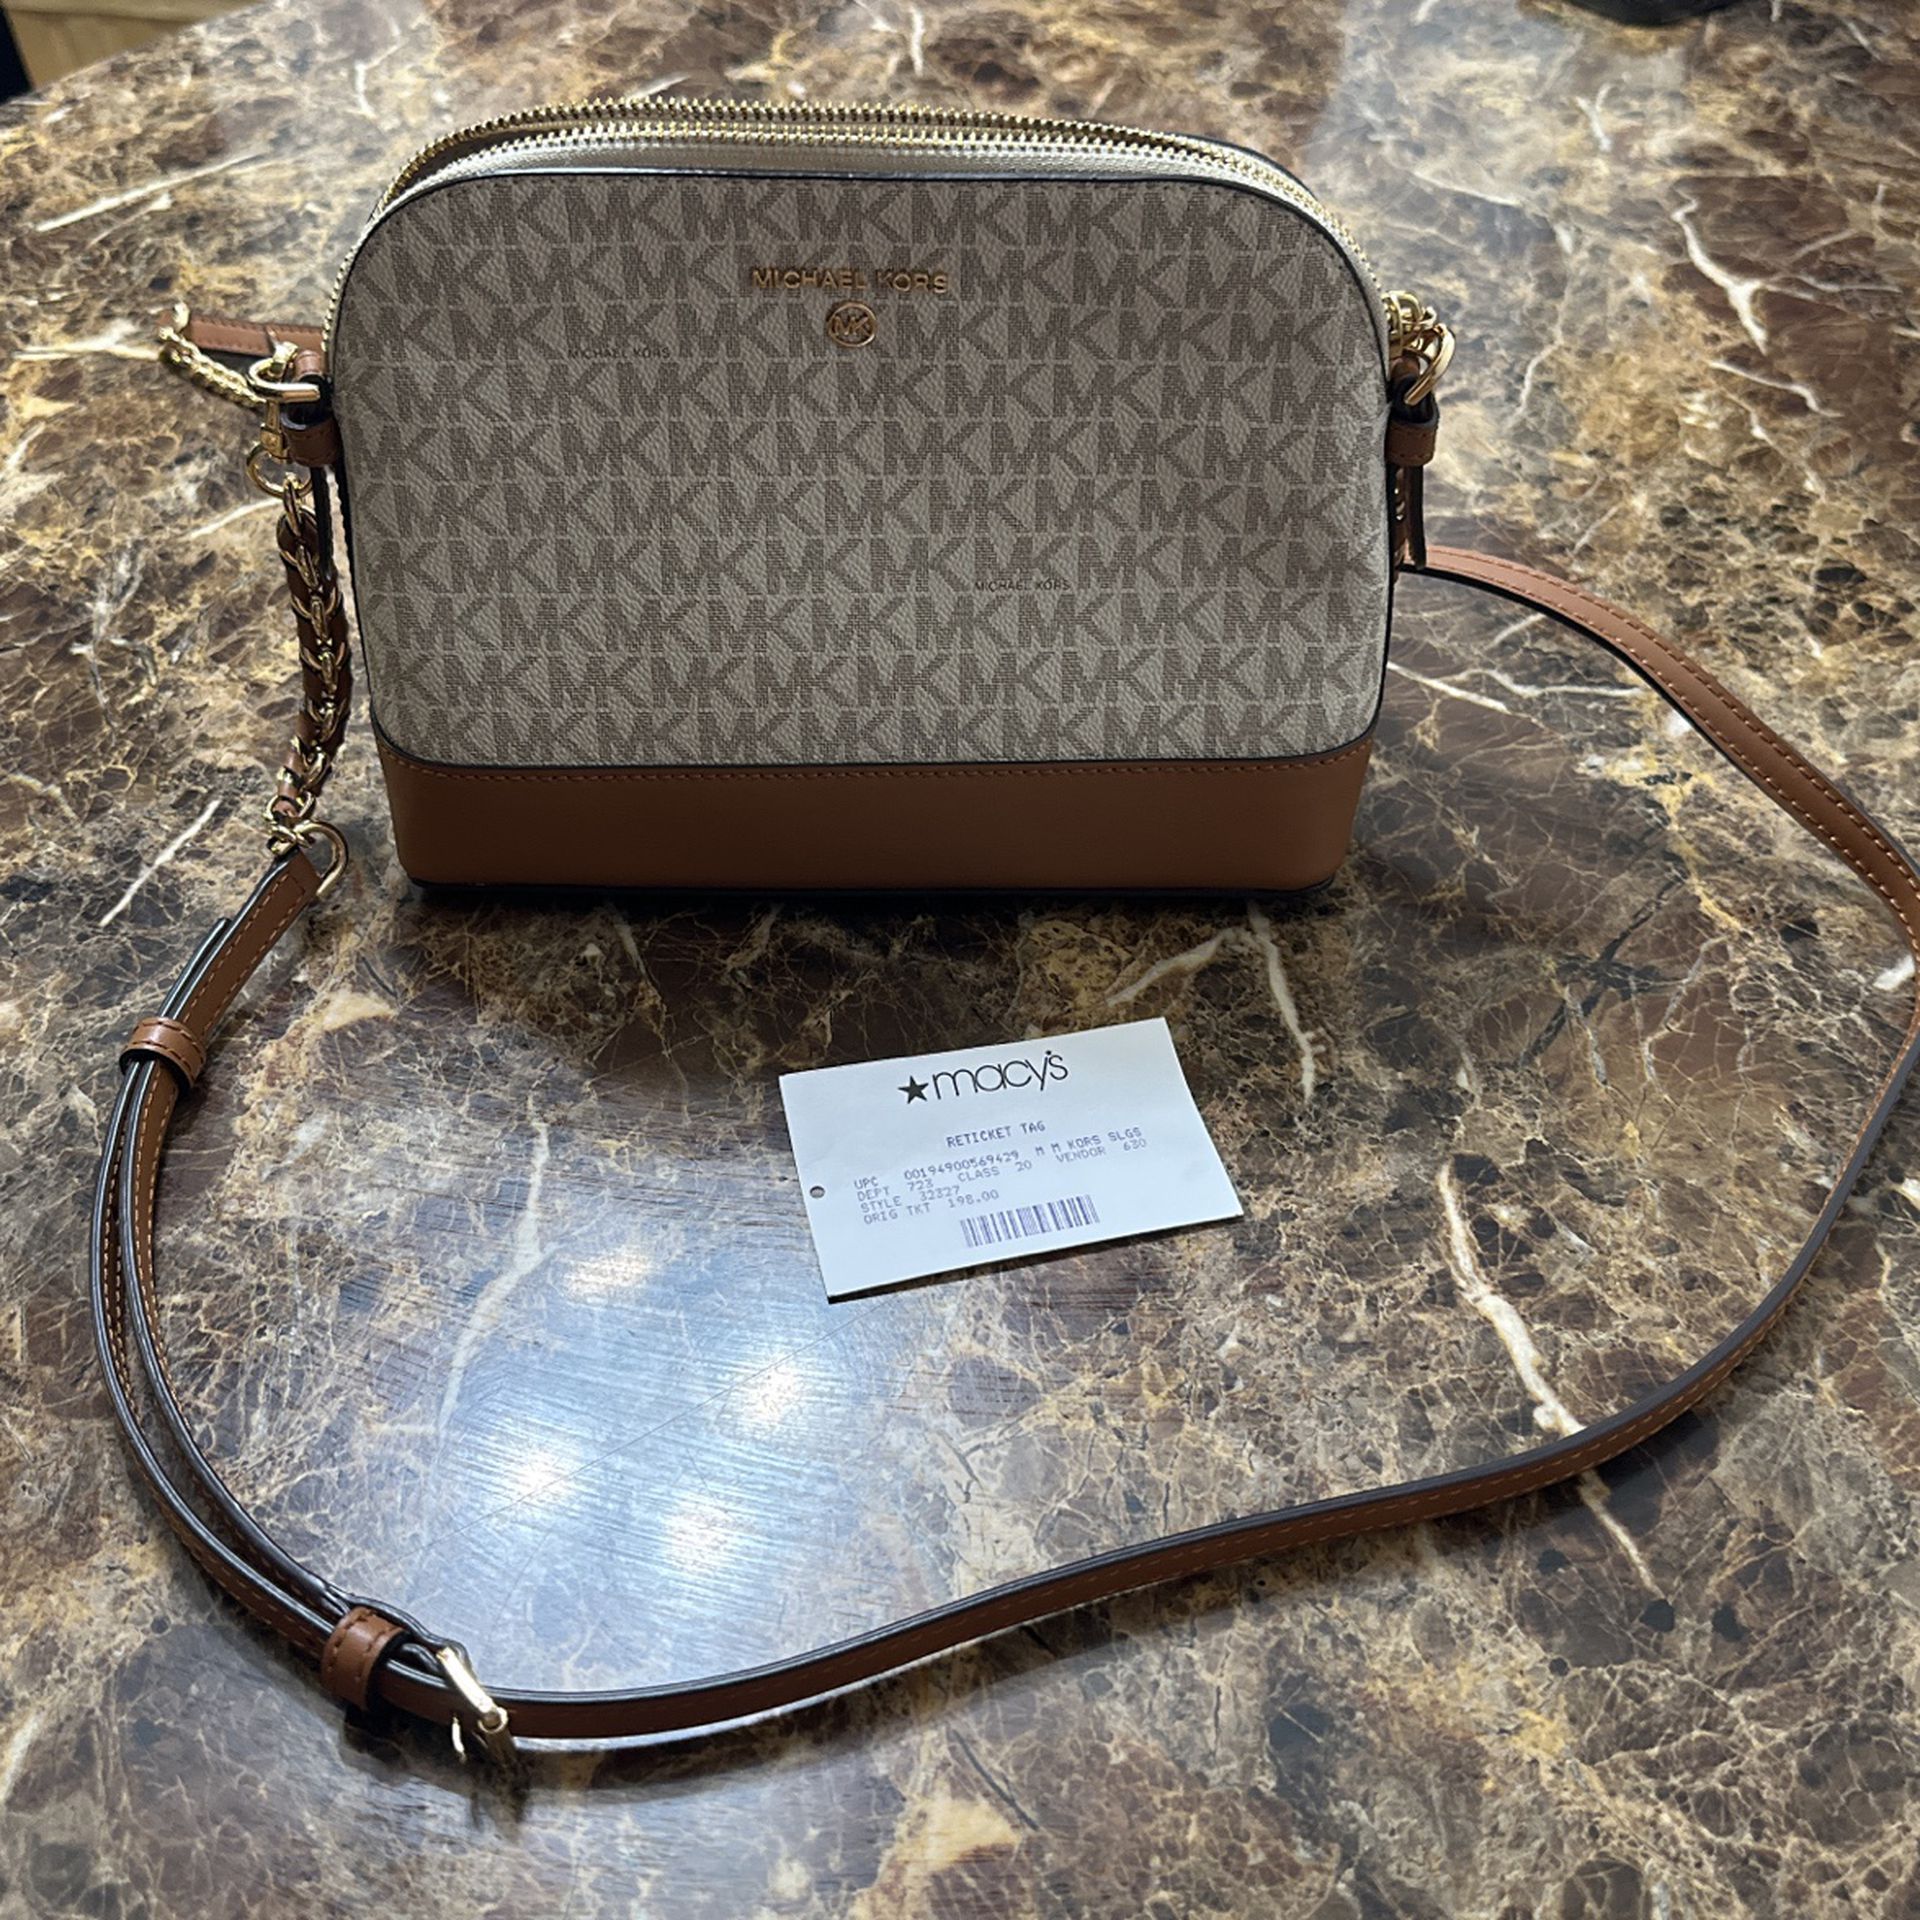 MICHAEL MICHAEL KORS Large Logo Dome Crossbody Bag for Sale in Paramount,  CA - OfferUp